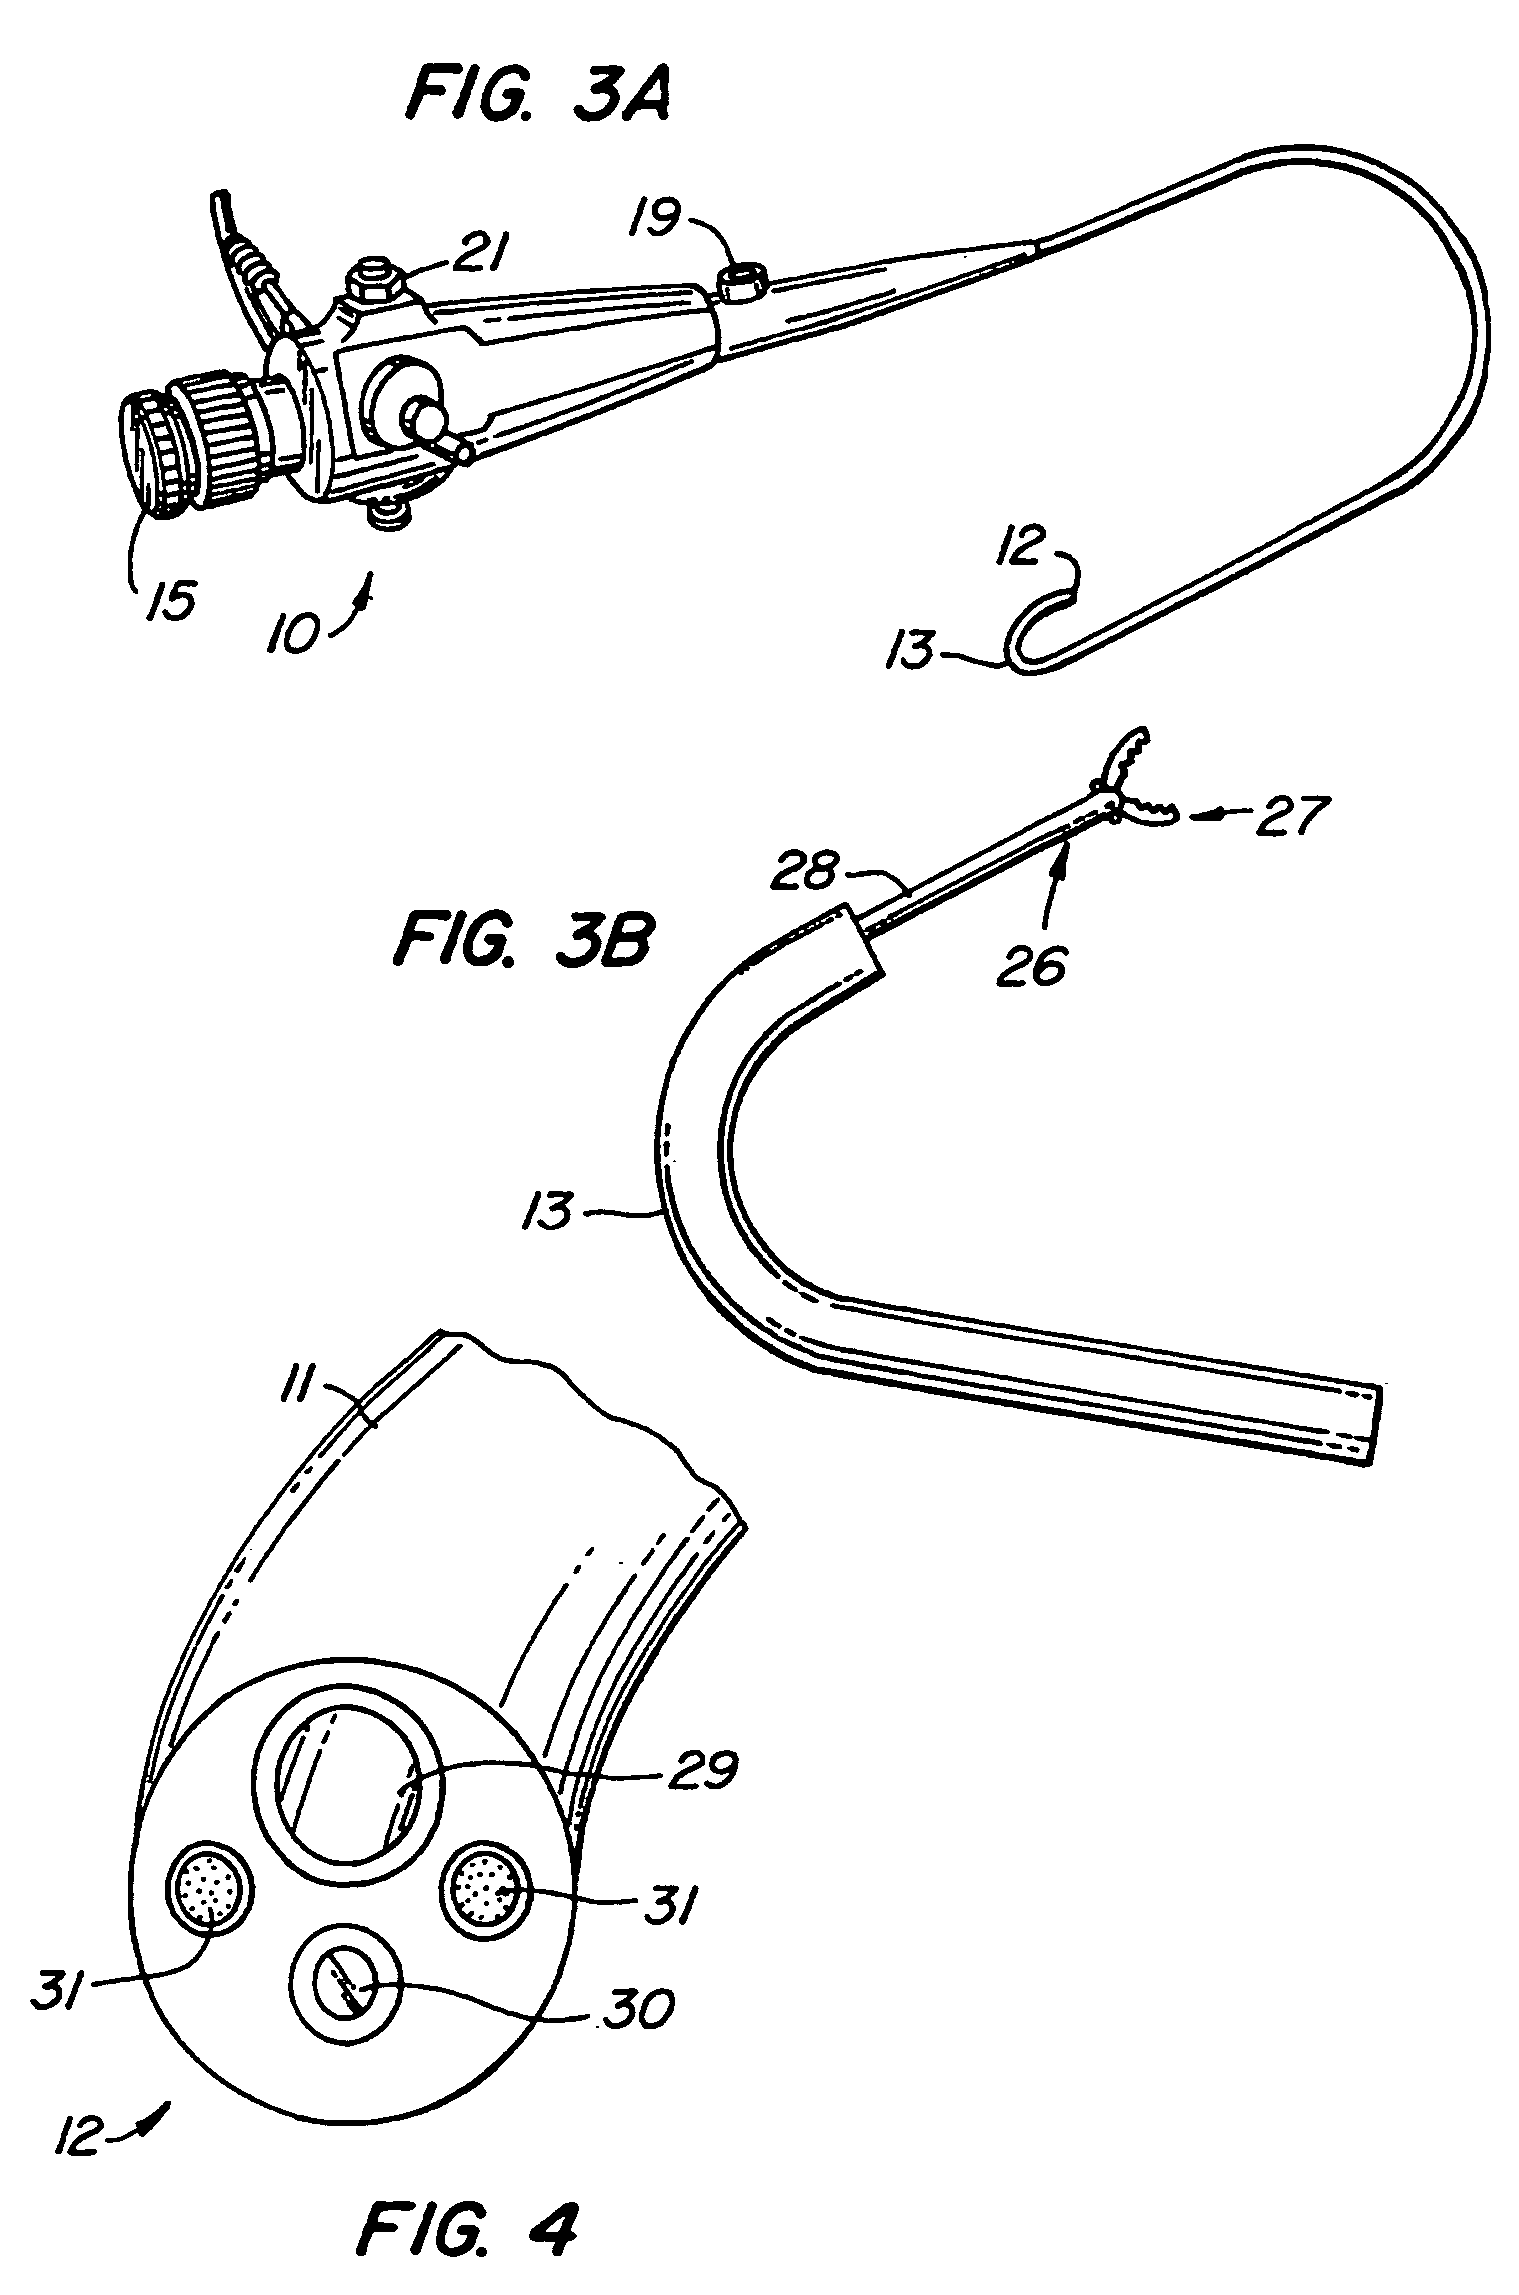 Lung access device